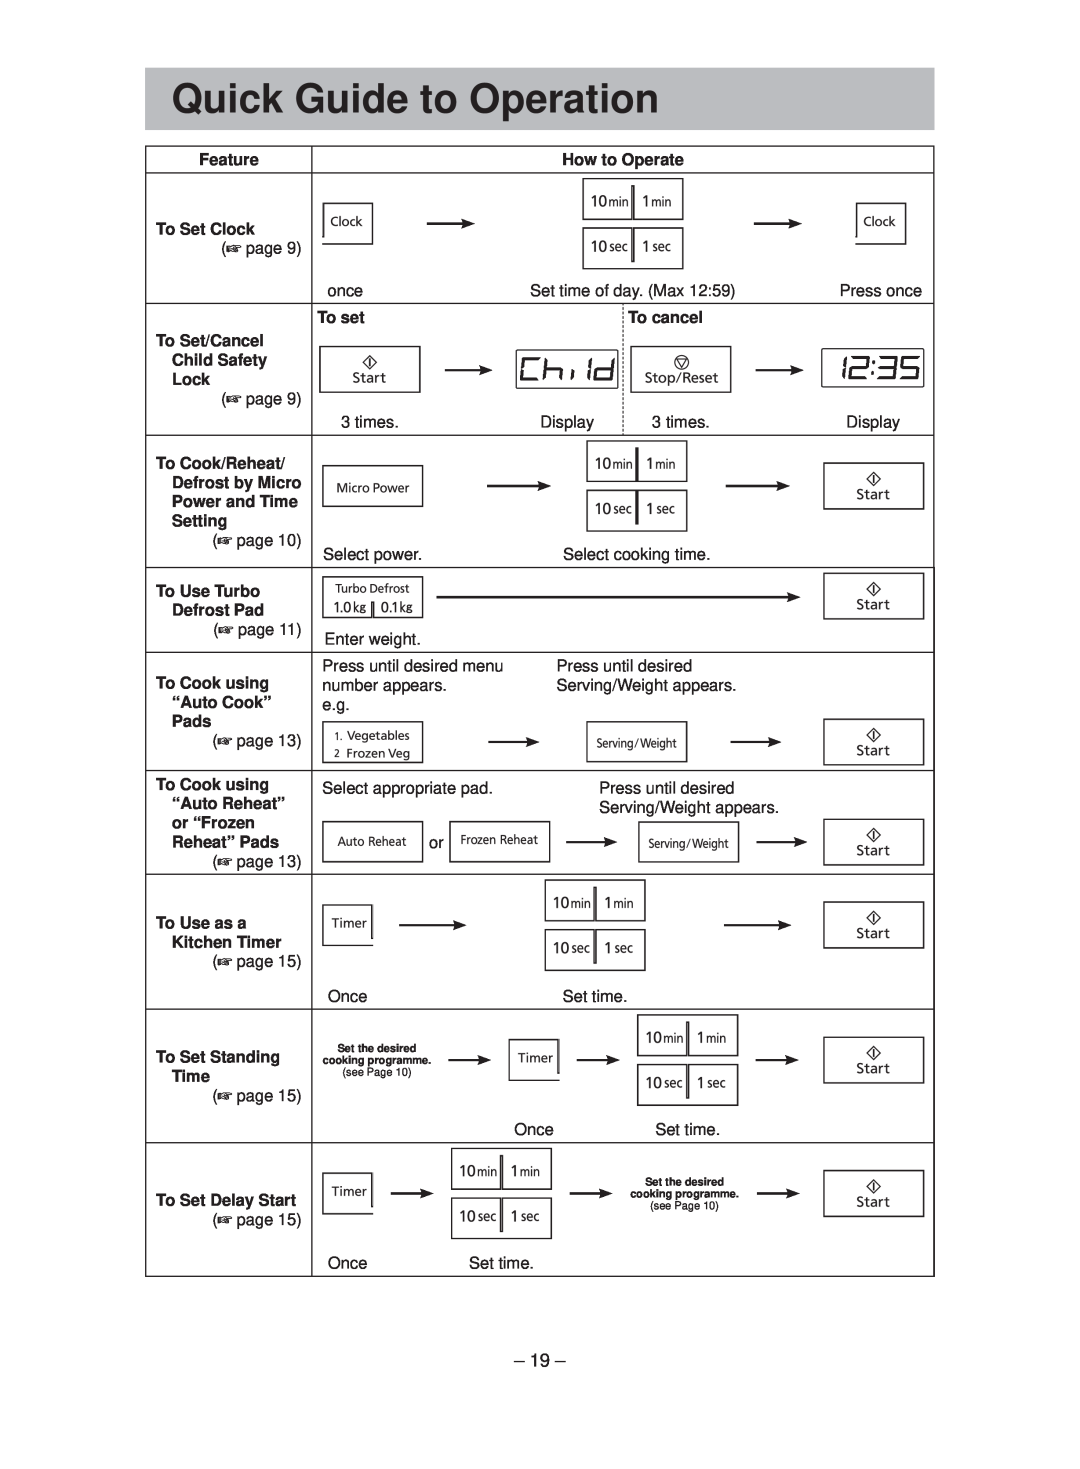 Panasonic NN-ST641W manual Quick Guide to Operation 